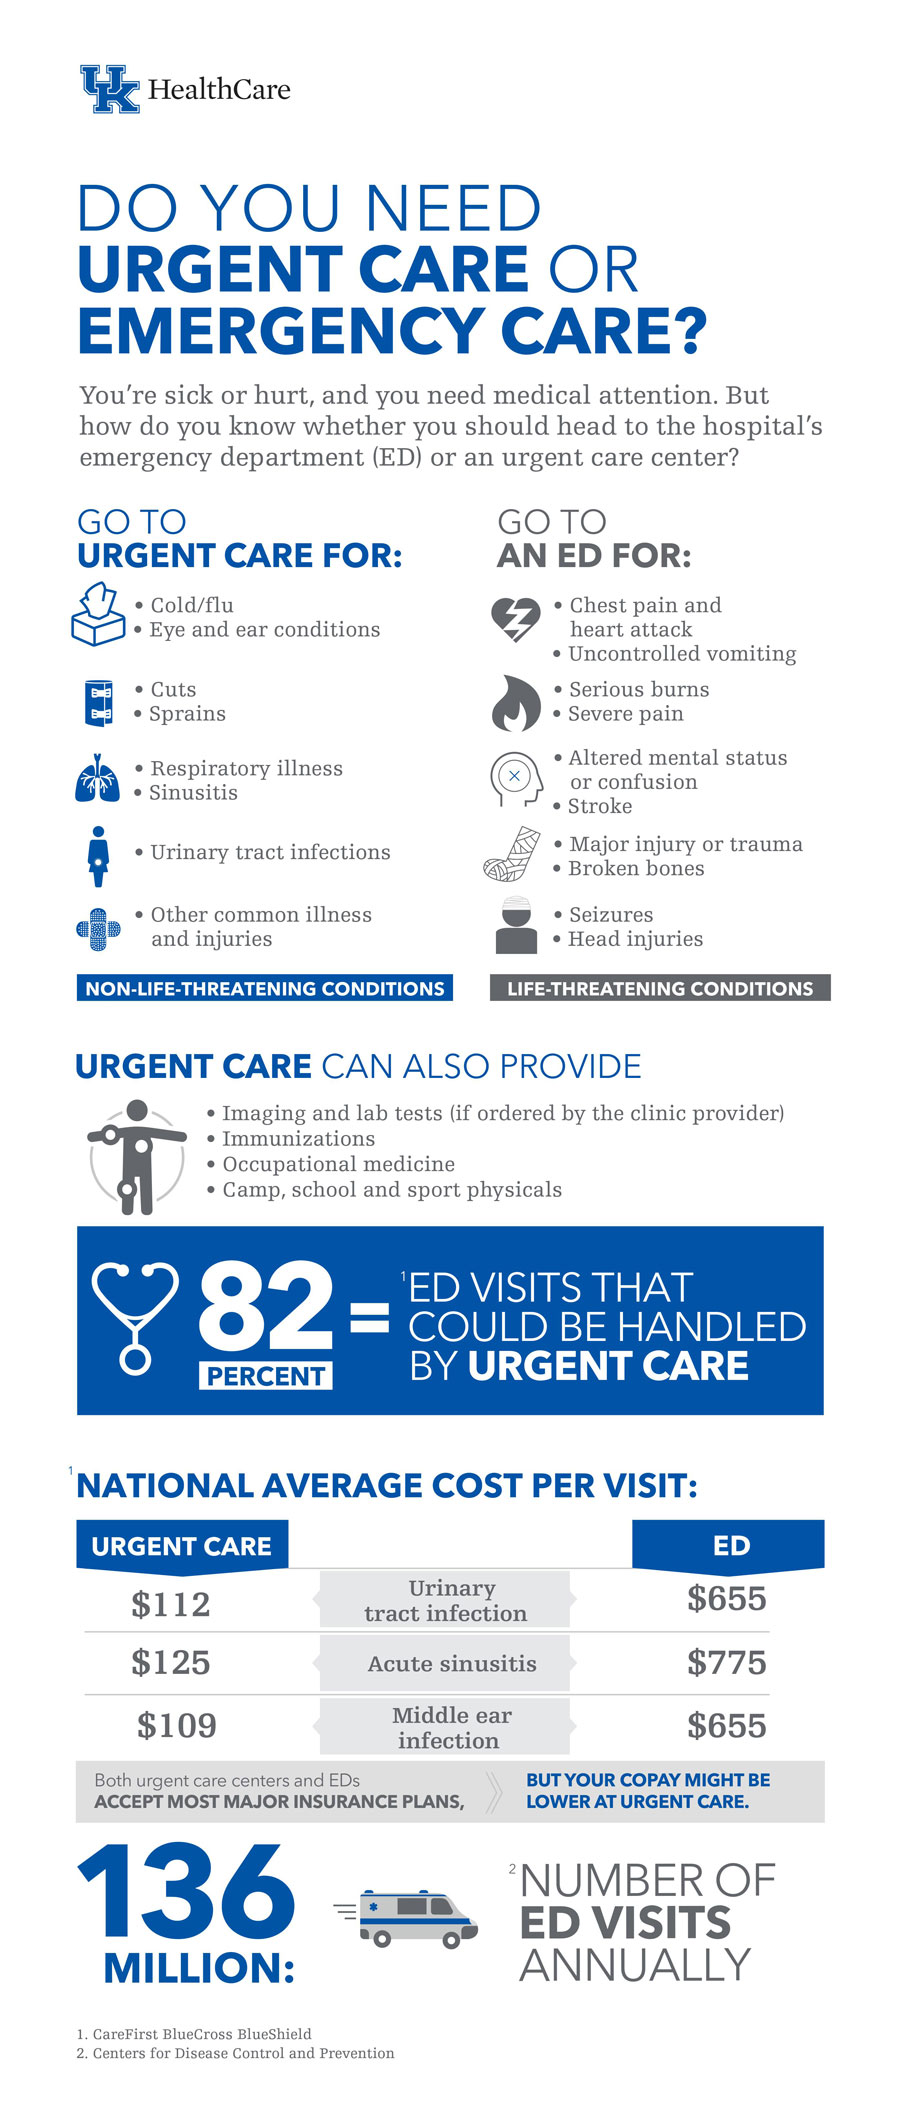 Infographic explaining when to use urgent care vs. when to go to the emergency department (emergency room). See text below.